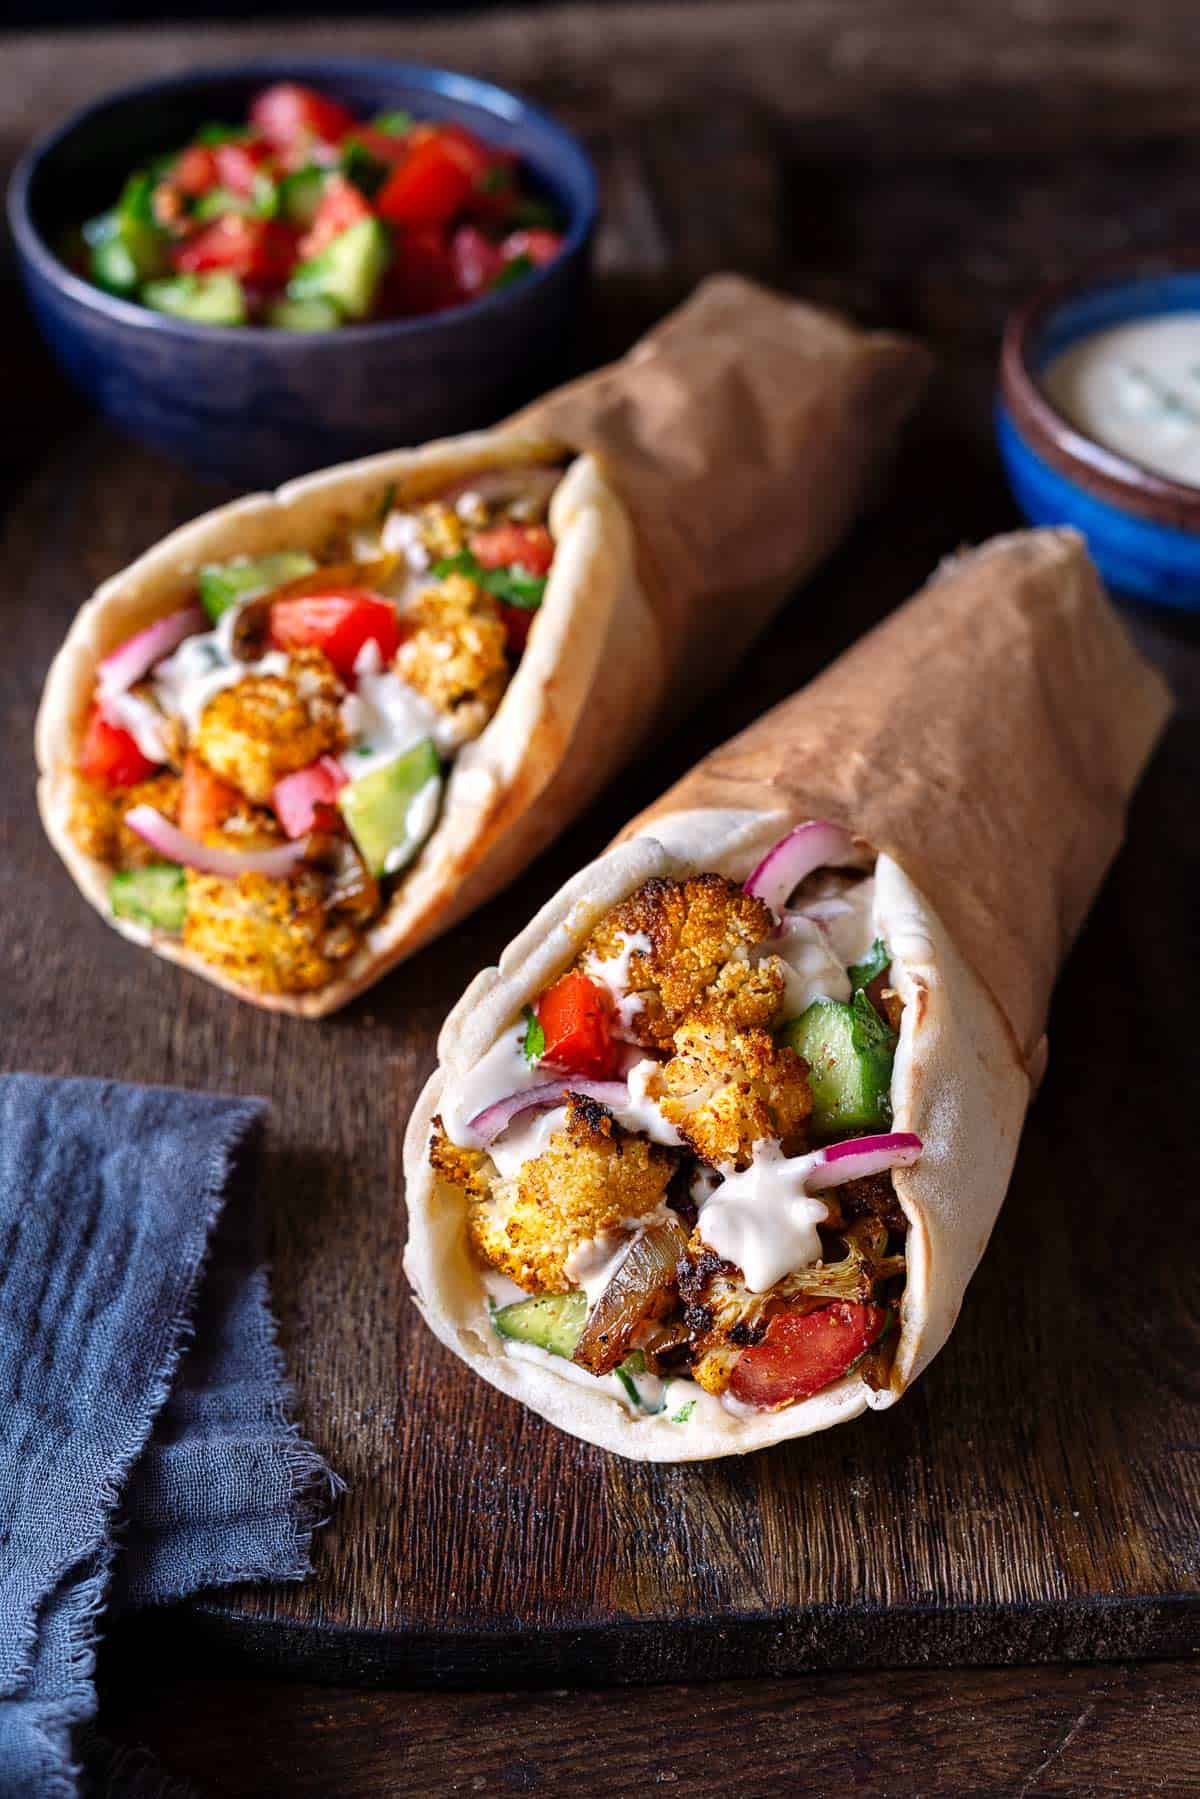 This homemade chicken shawarma recipe is made with a special spice